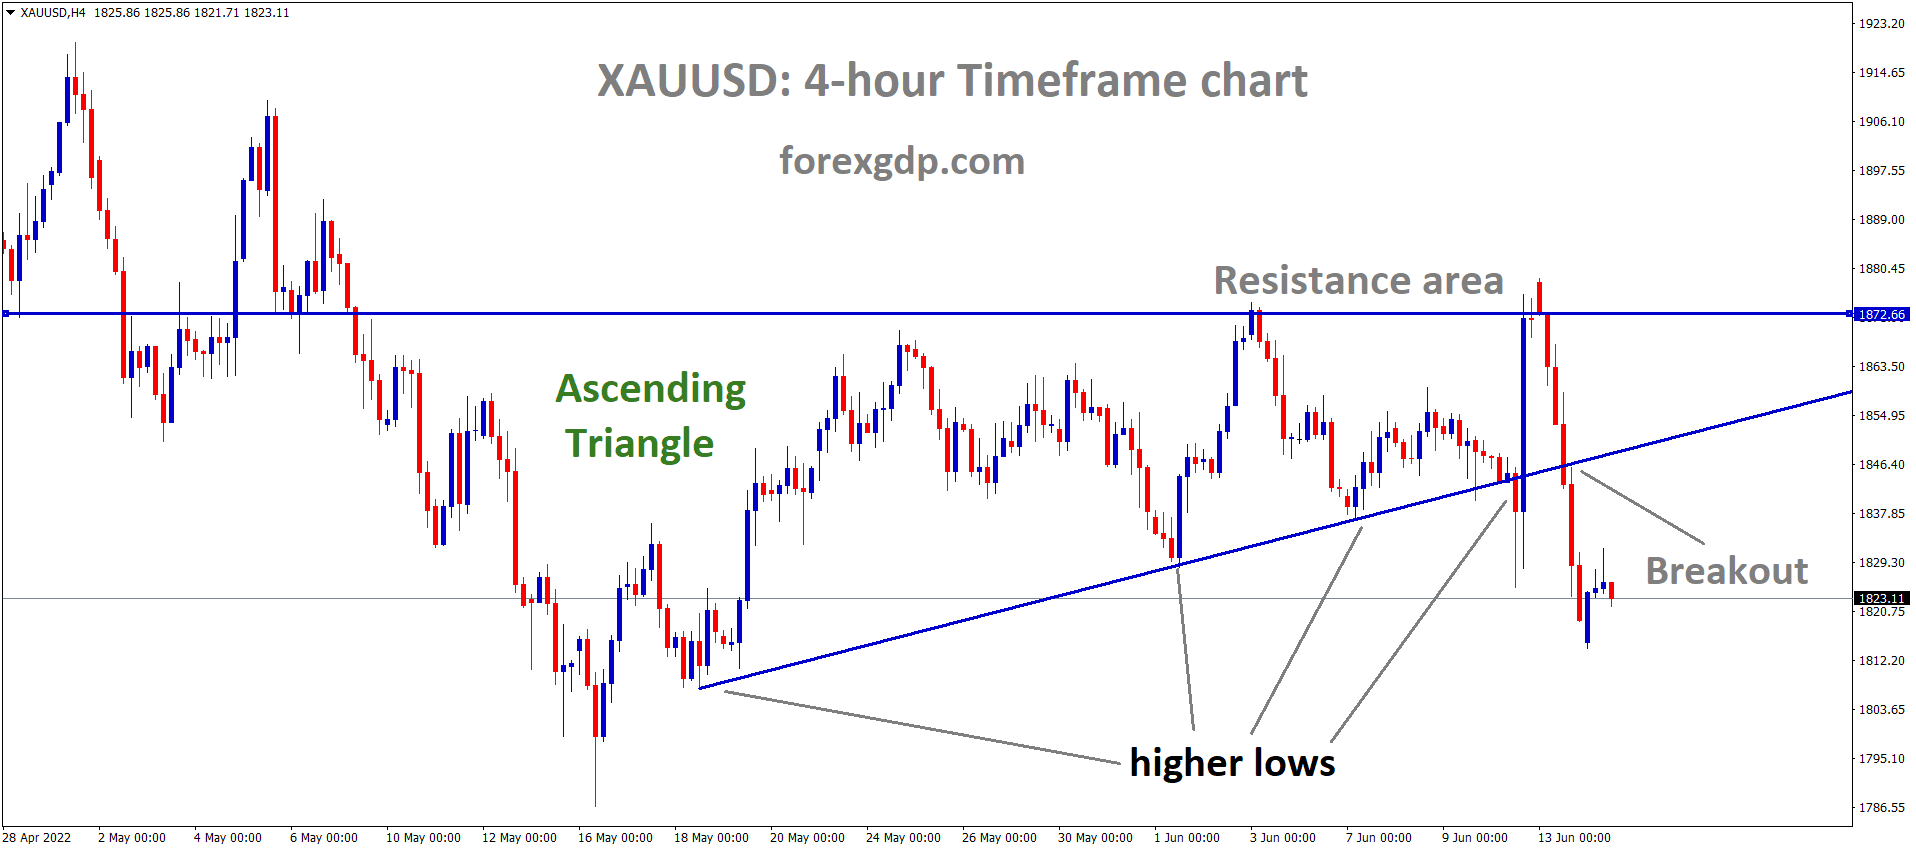 XAUUSD Gold price has broken the higher low area of the Ascending triangle pattern.